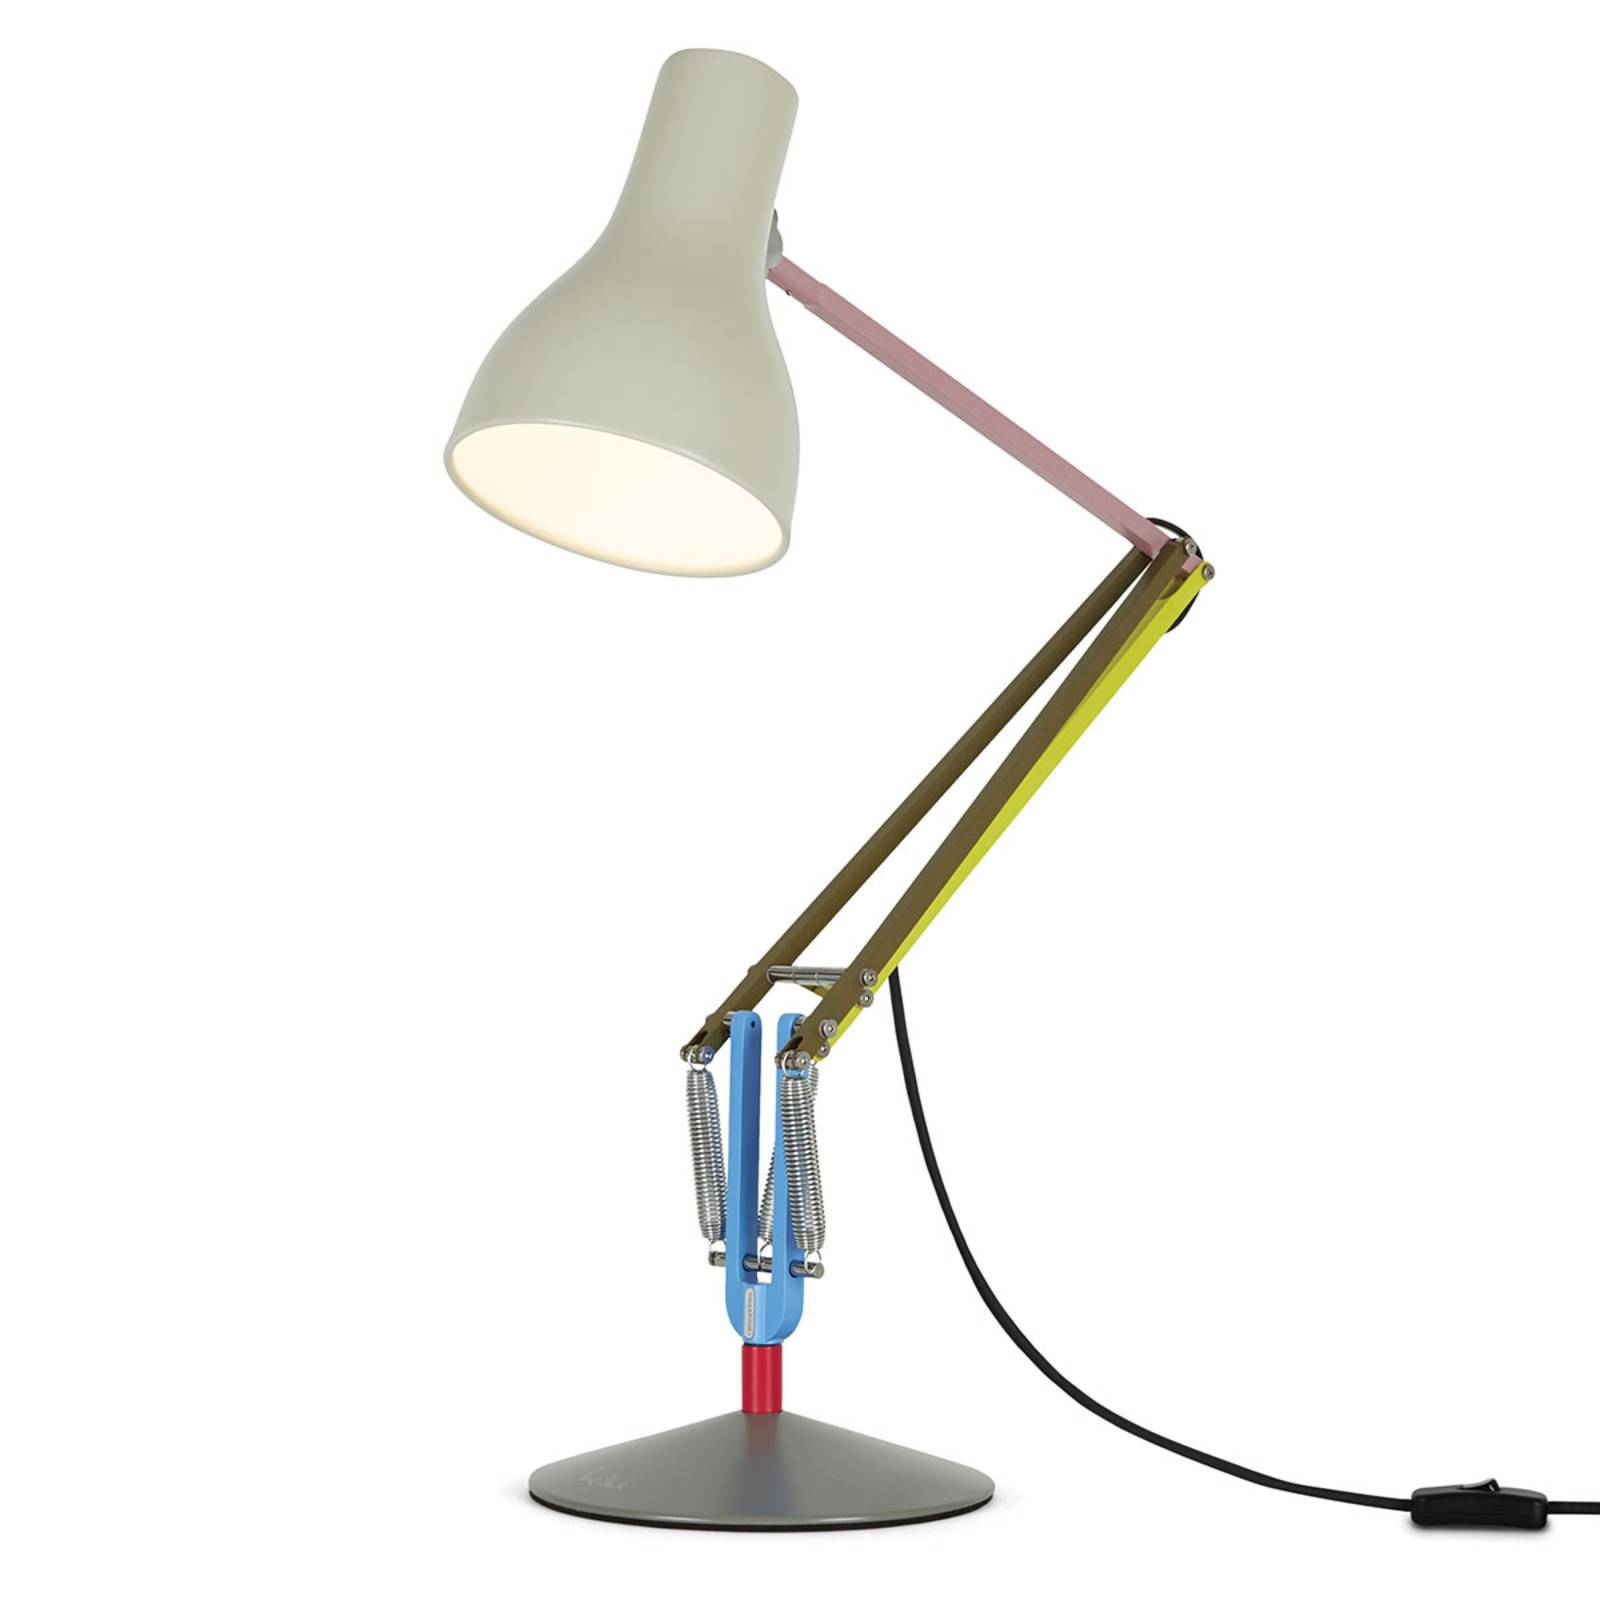 Anglepoise Type 75 Tischlampe Paul Smith Edition 1 von Anglepoise